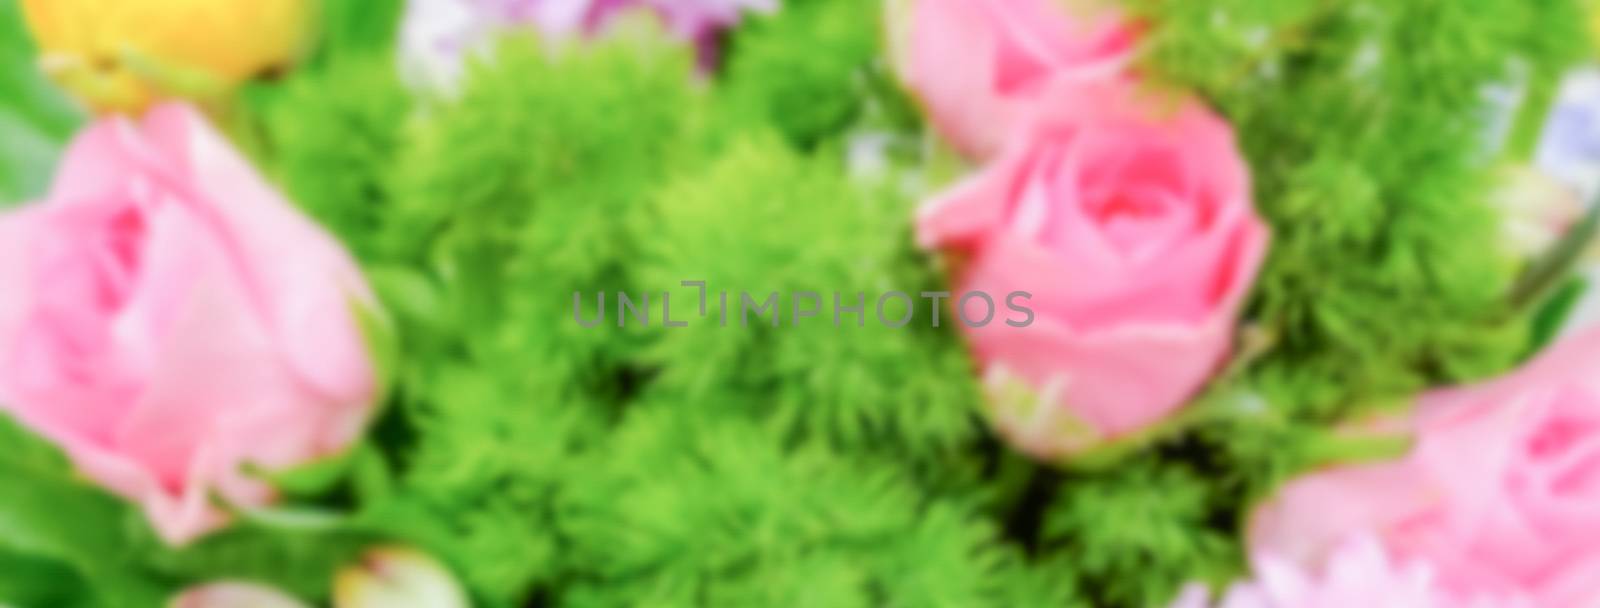 Defocused background of a colorful mix of flowers by marcorubino